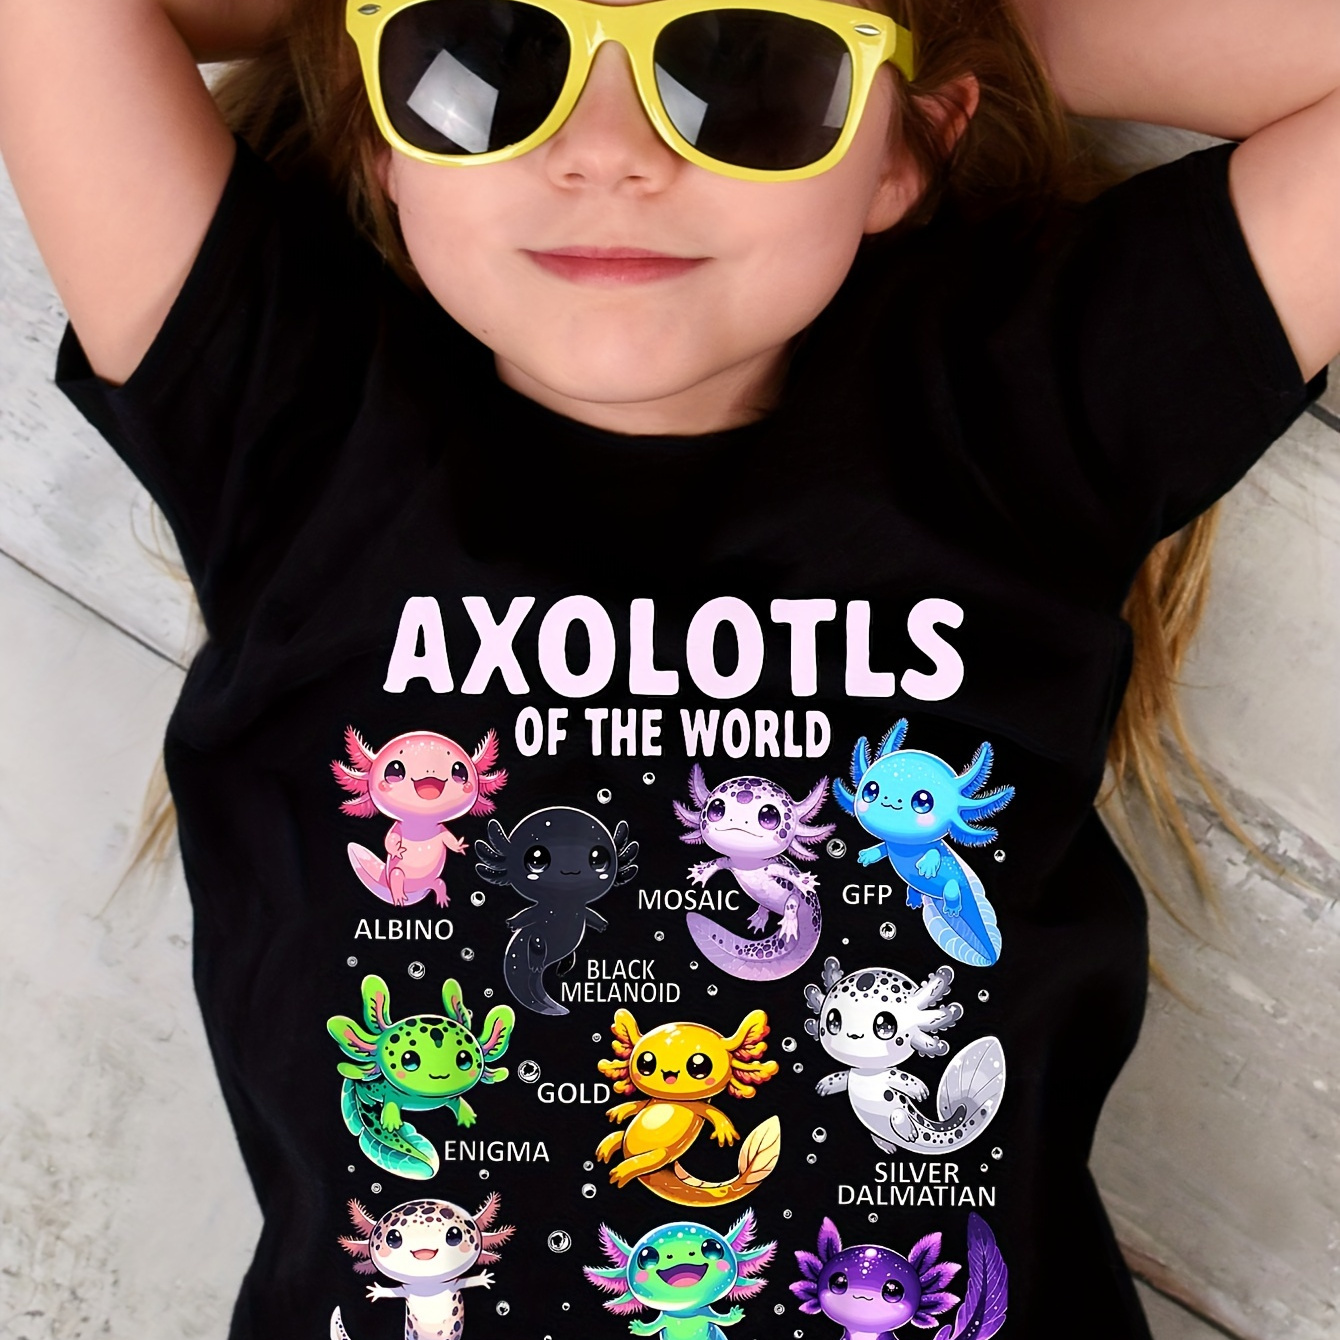 

Colorful Cartoon Axolotls Graphic Print Tee, Girls' Casual & Comfy Crew Neck Short Sleeve T-shirt For Spring & Summer, Girls' Clothes For Everyday Activities